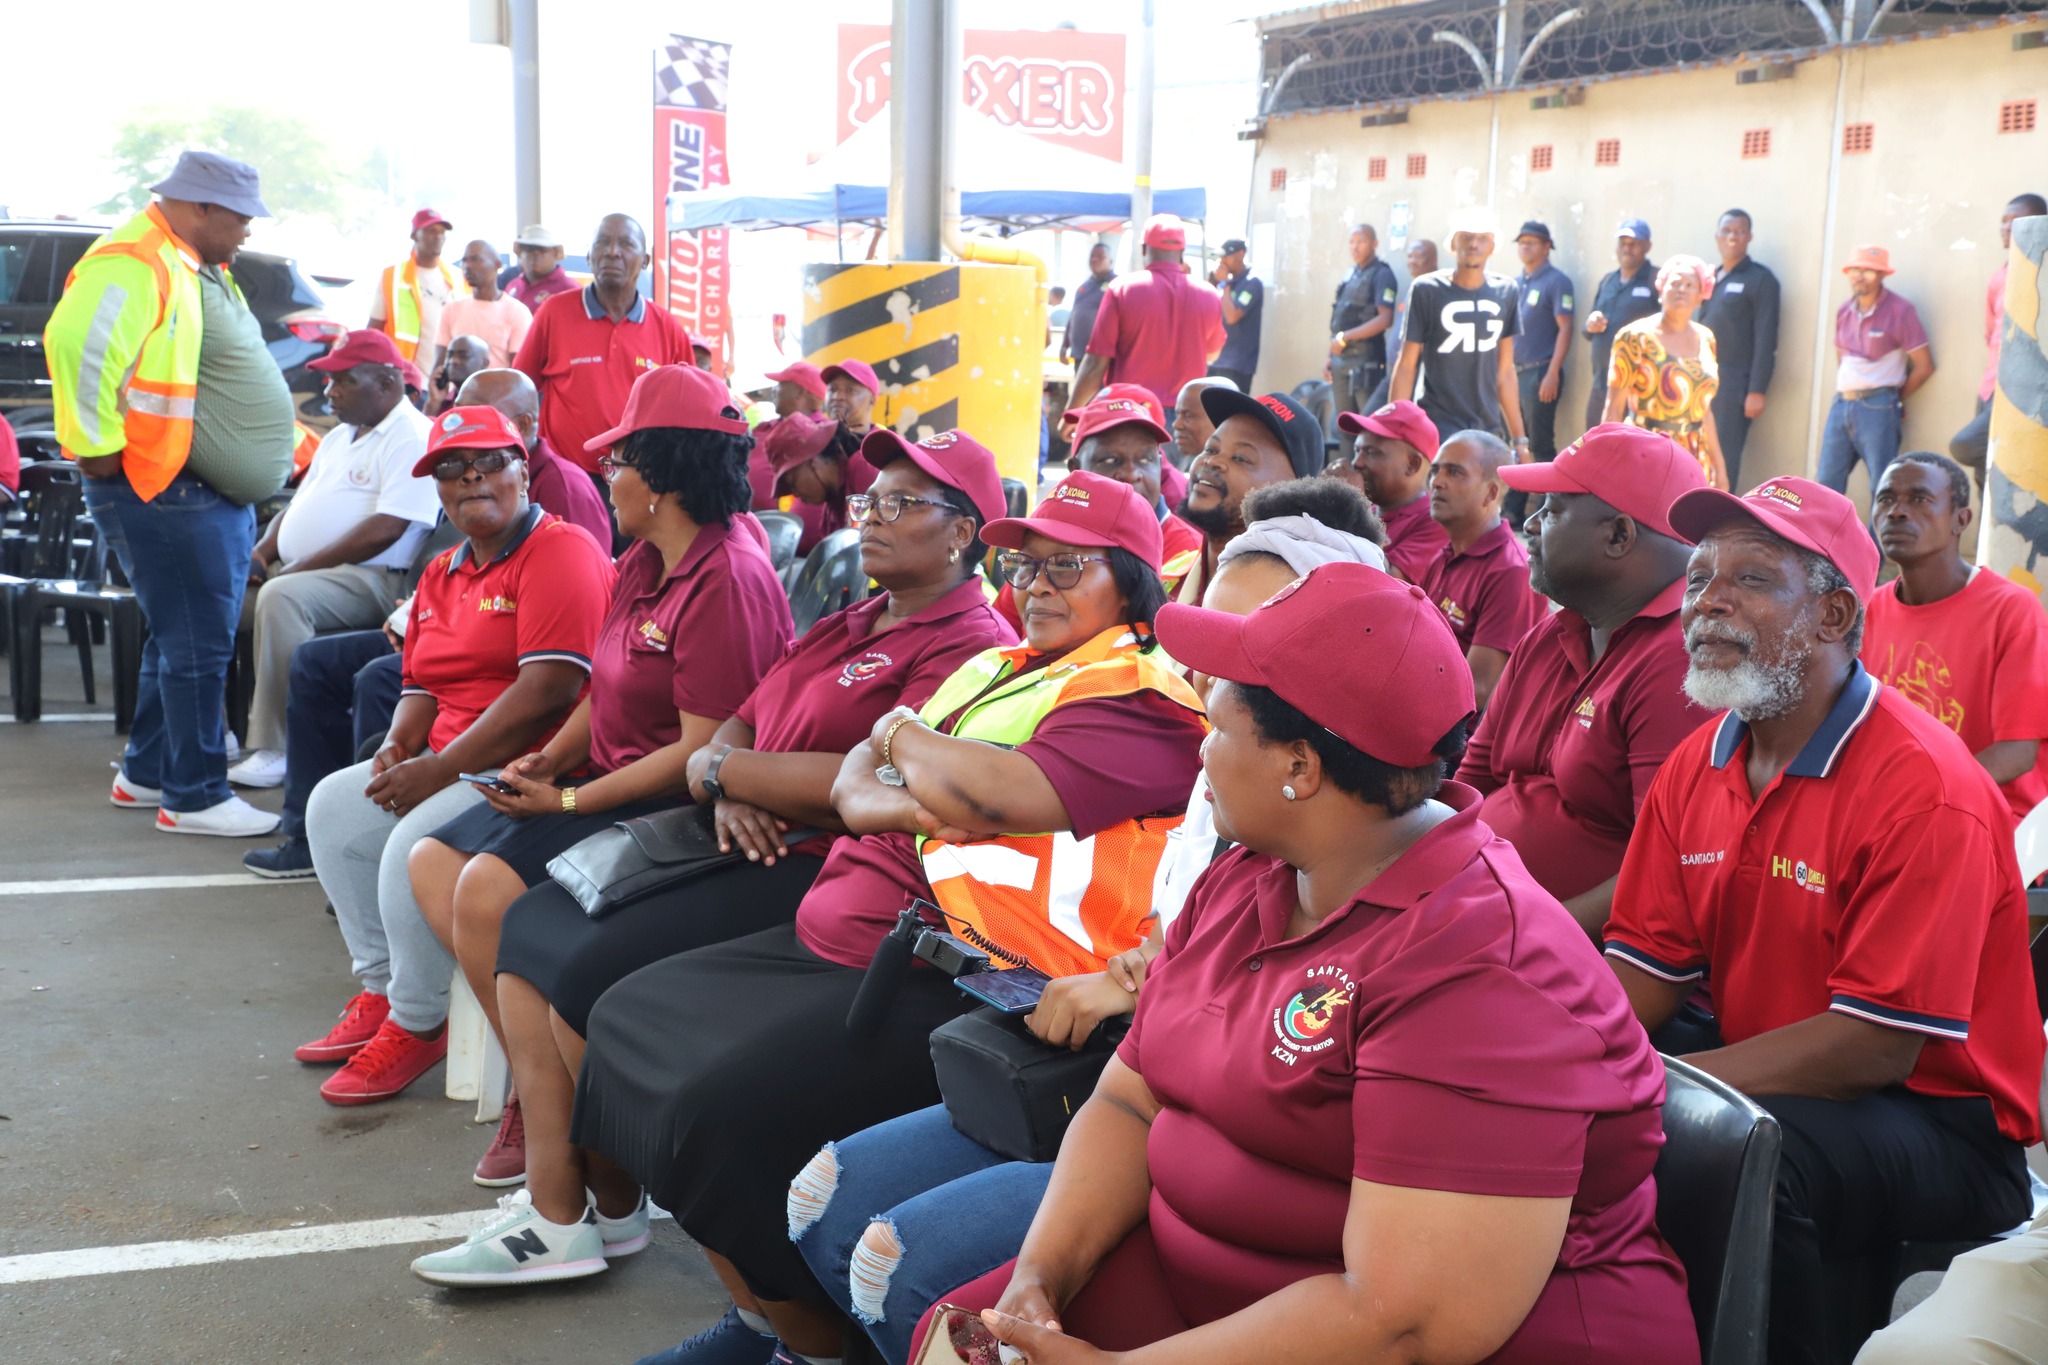 MEC Hlomuka joins SANTACO in promoting road safety and stability in the taxi industry in Richards bay